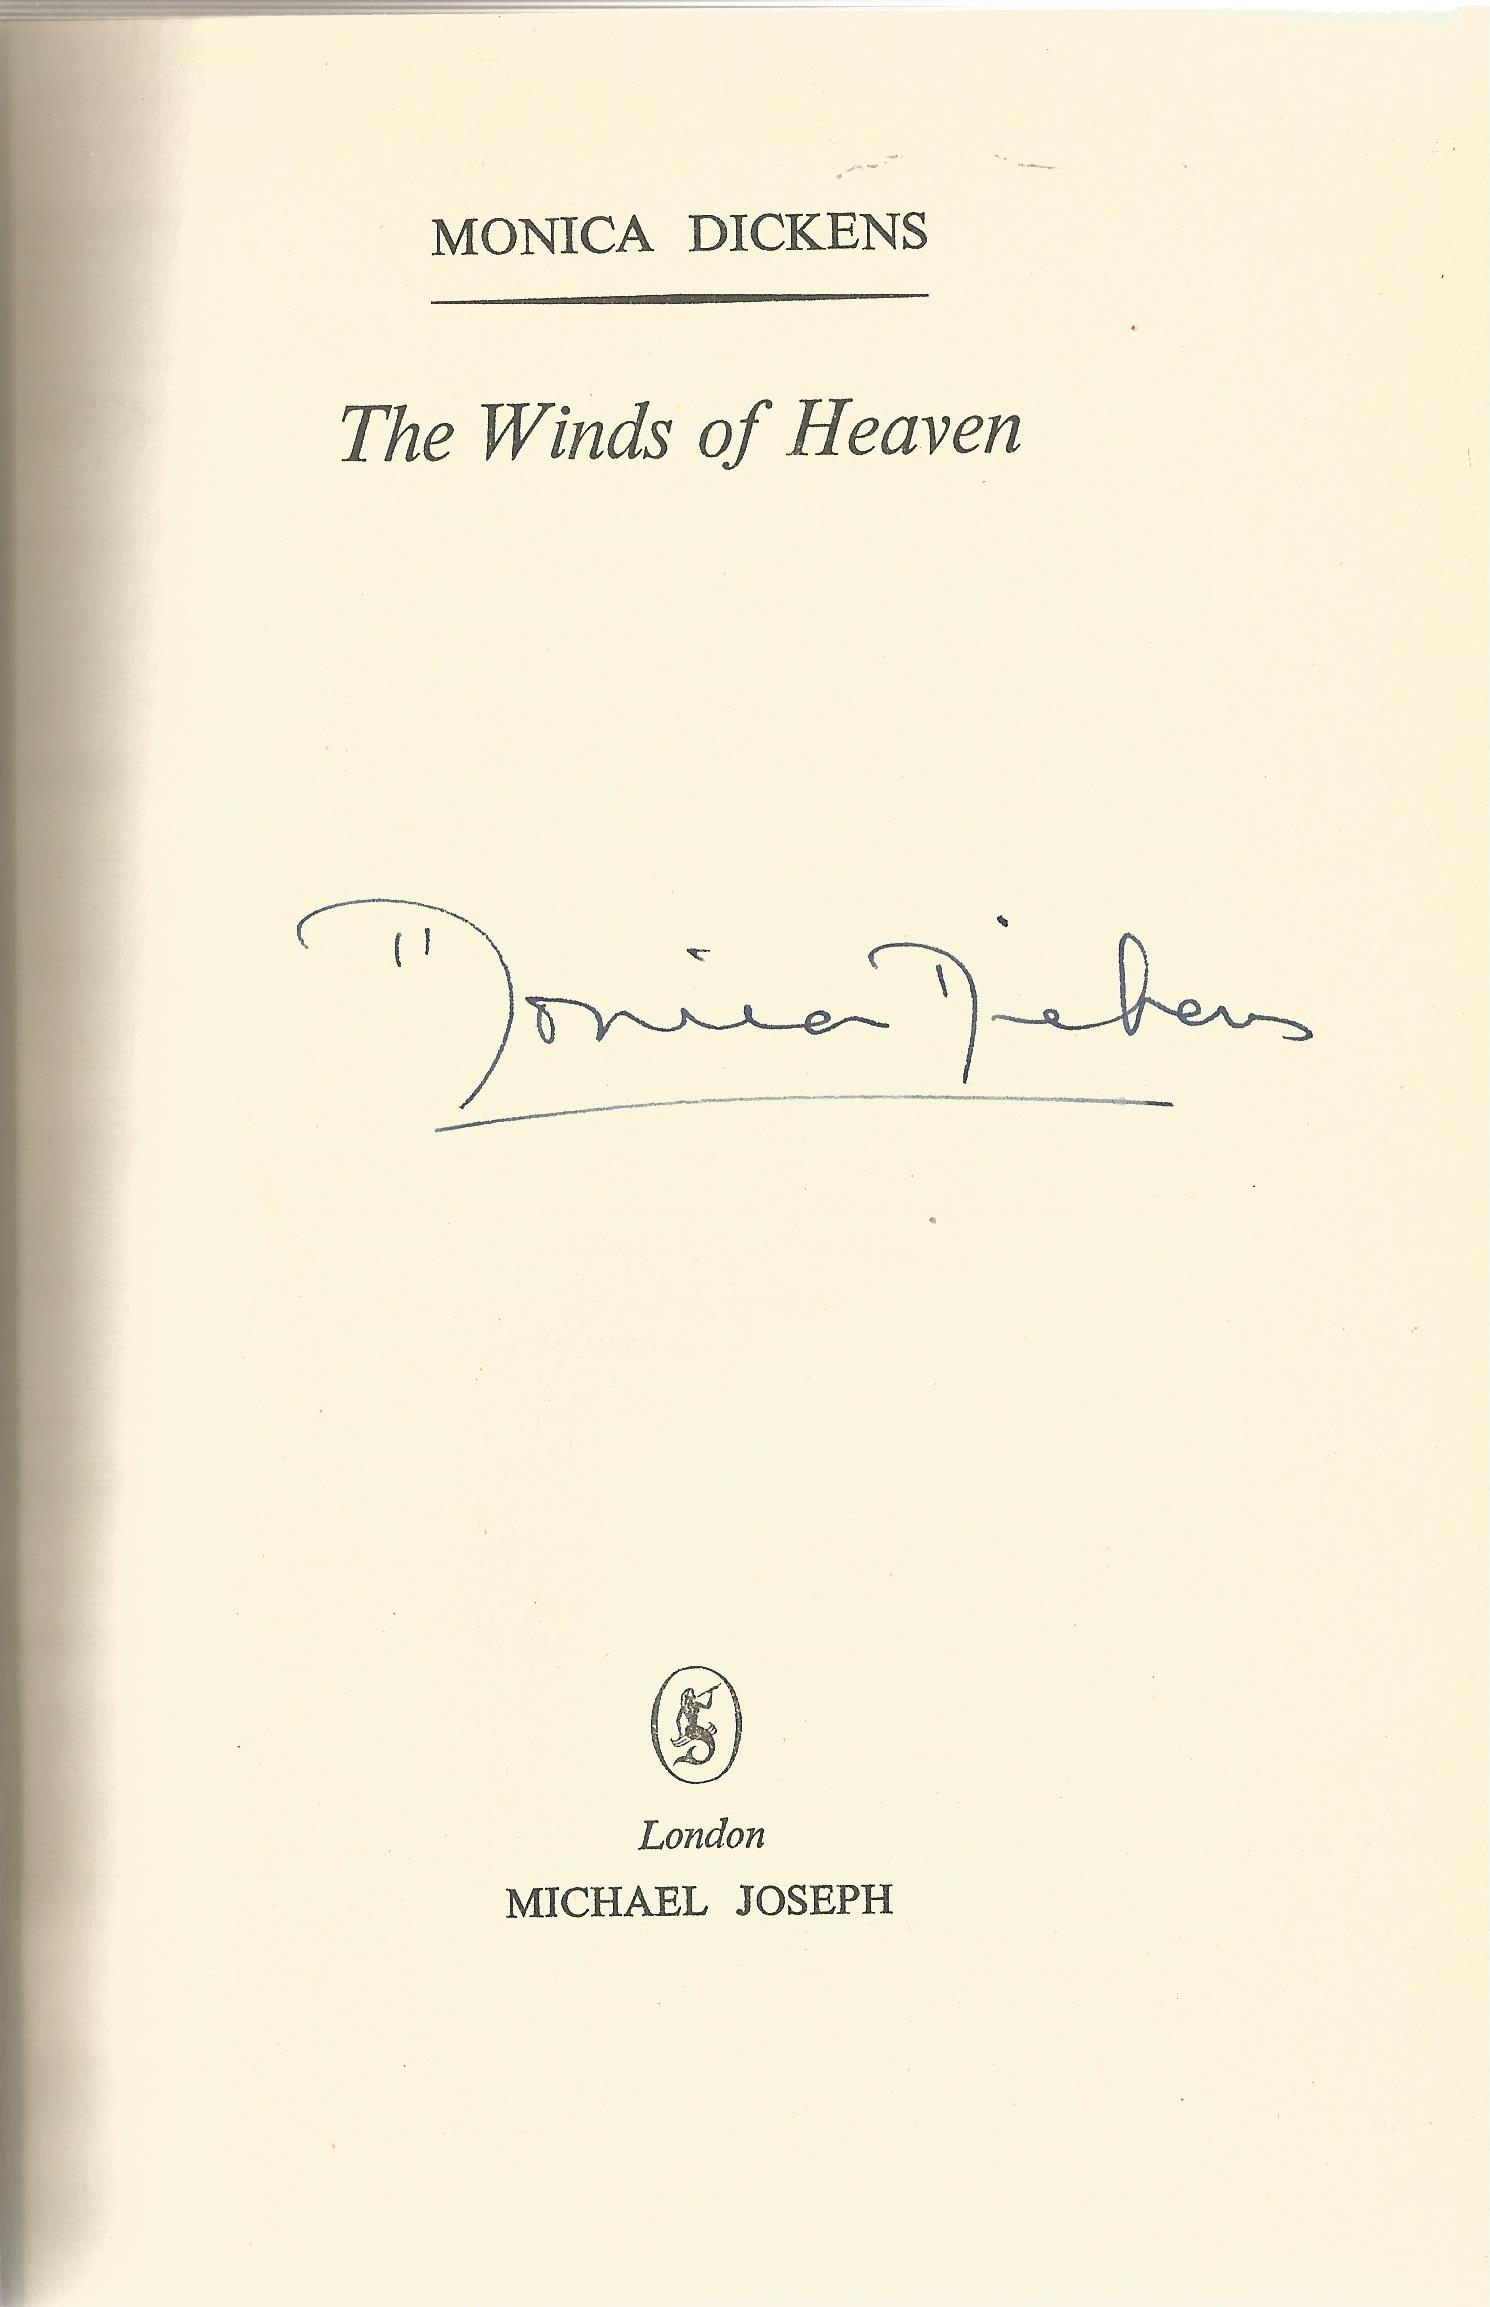 Monica Dickens Hardback Book The Winds of Heaven signed by the Author on the Title Page no dust - Image 2 of 2